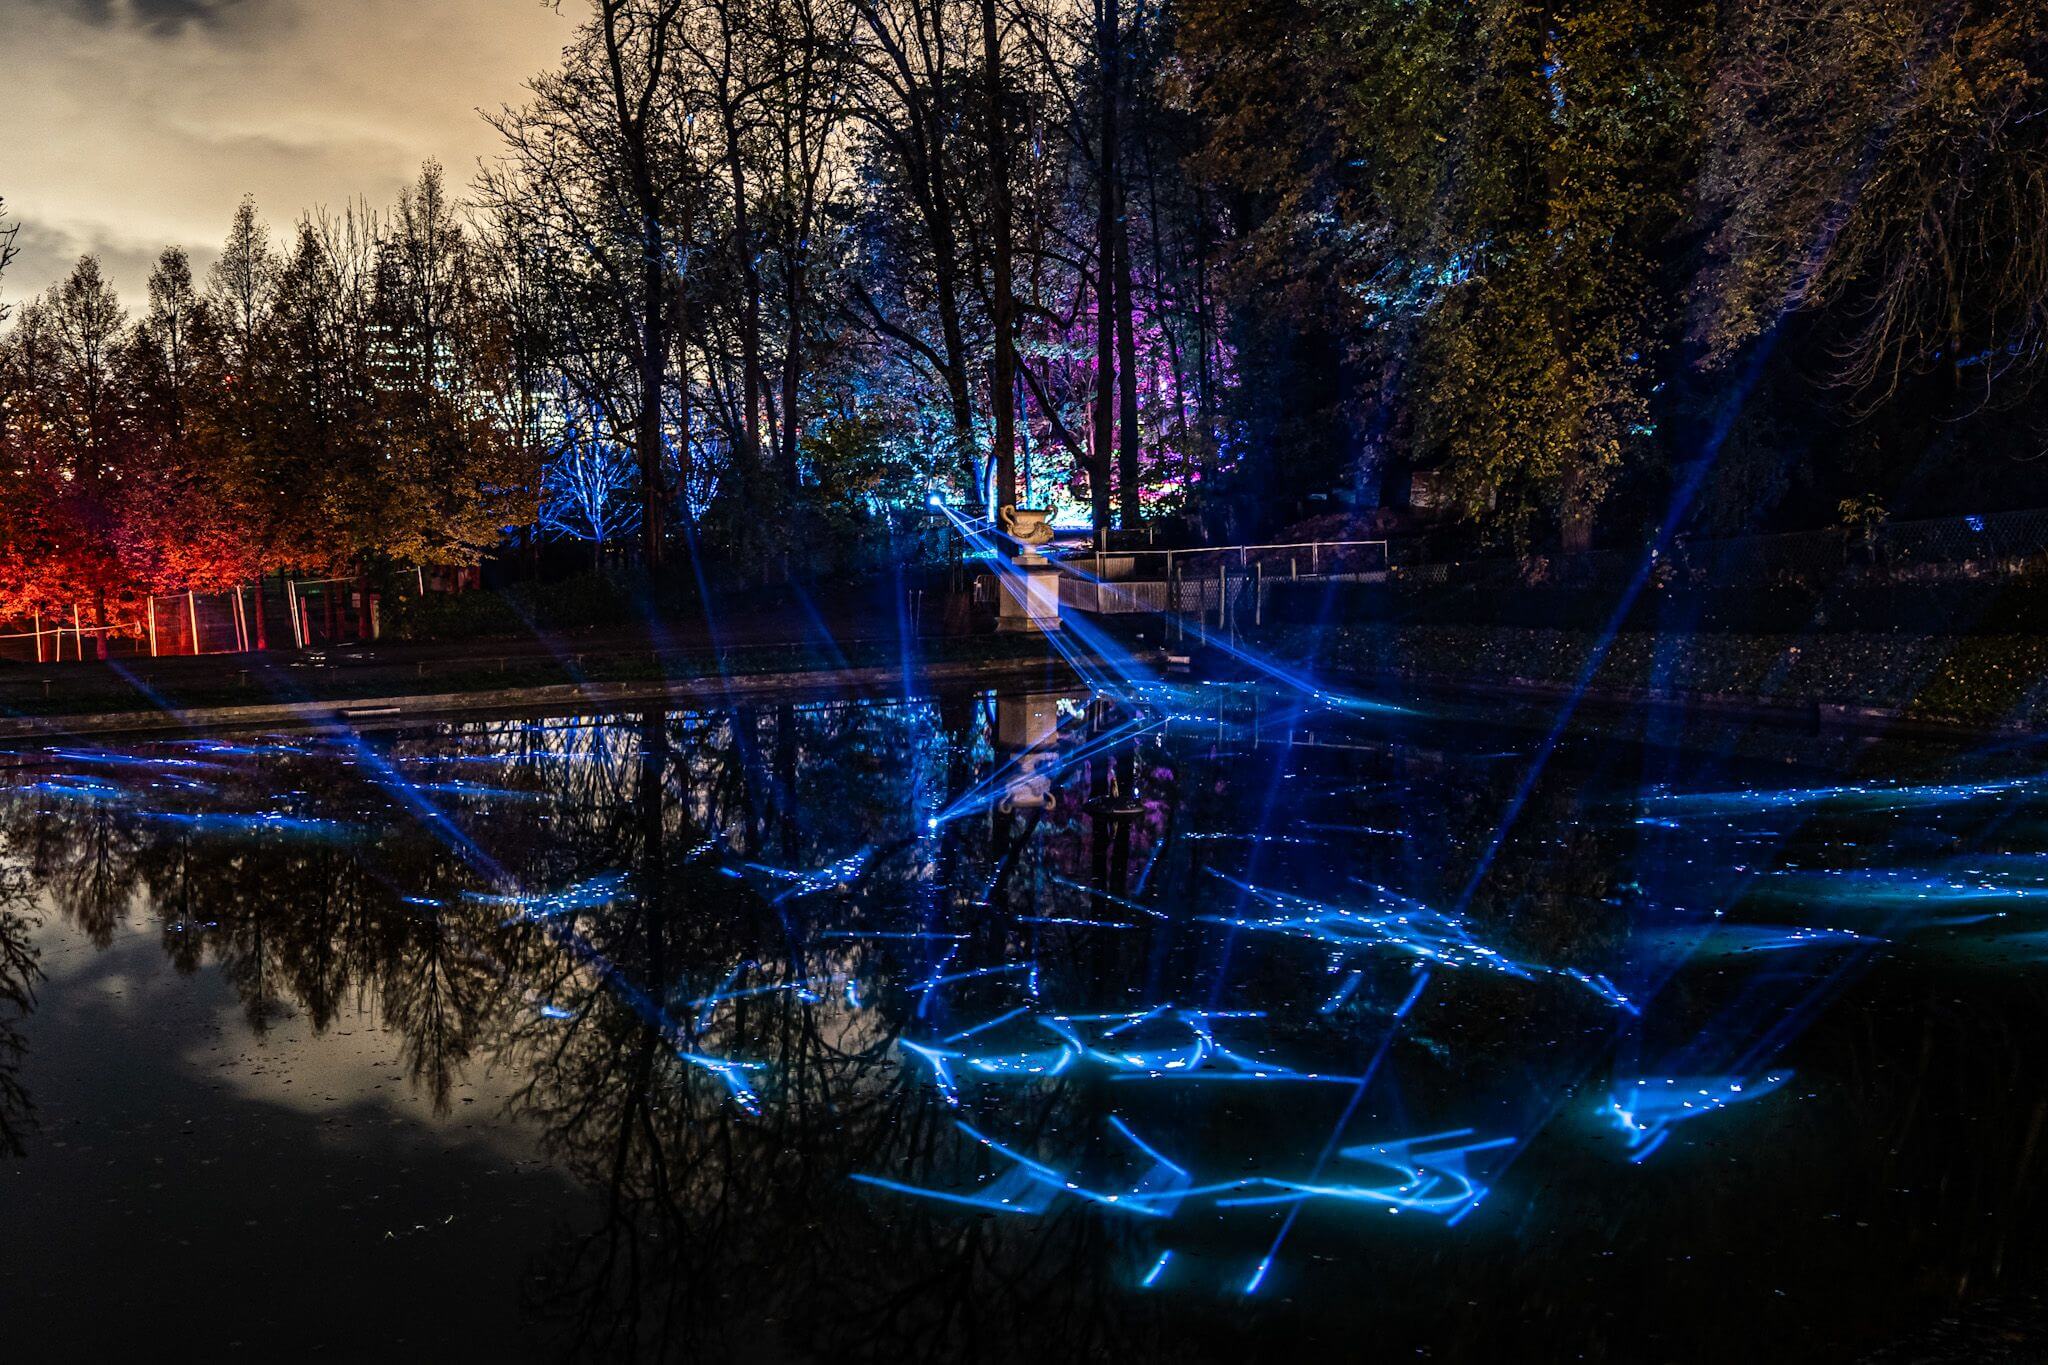 Europe Évènement - The Constellation effect for a lake mapping at the Domaine national de Saint-Cloud